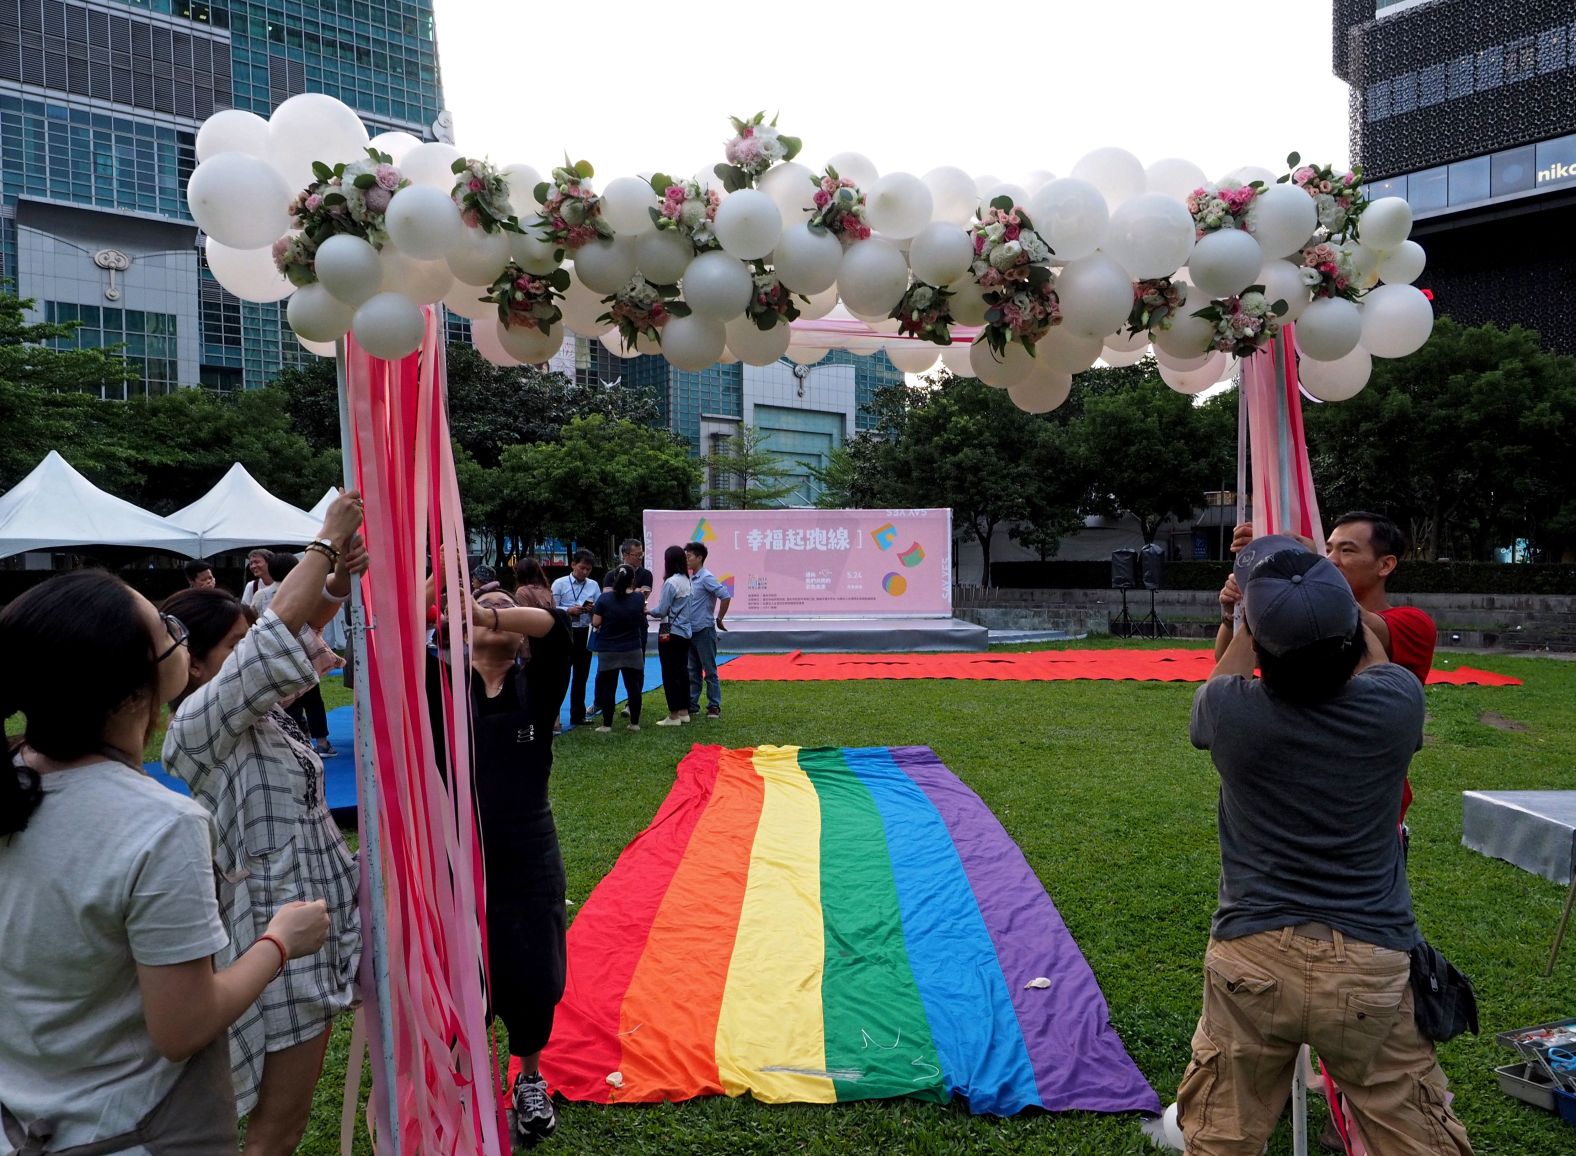 LGBT activists put up an archway for gay couples to walk a rainbow flag carpet to a stage near the Taipei 101 skyscraper.